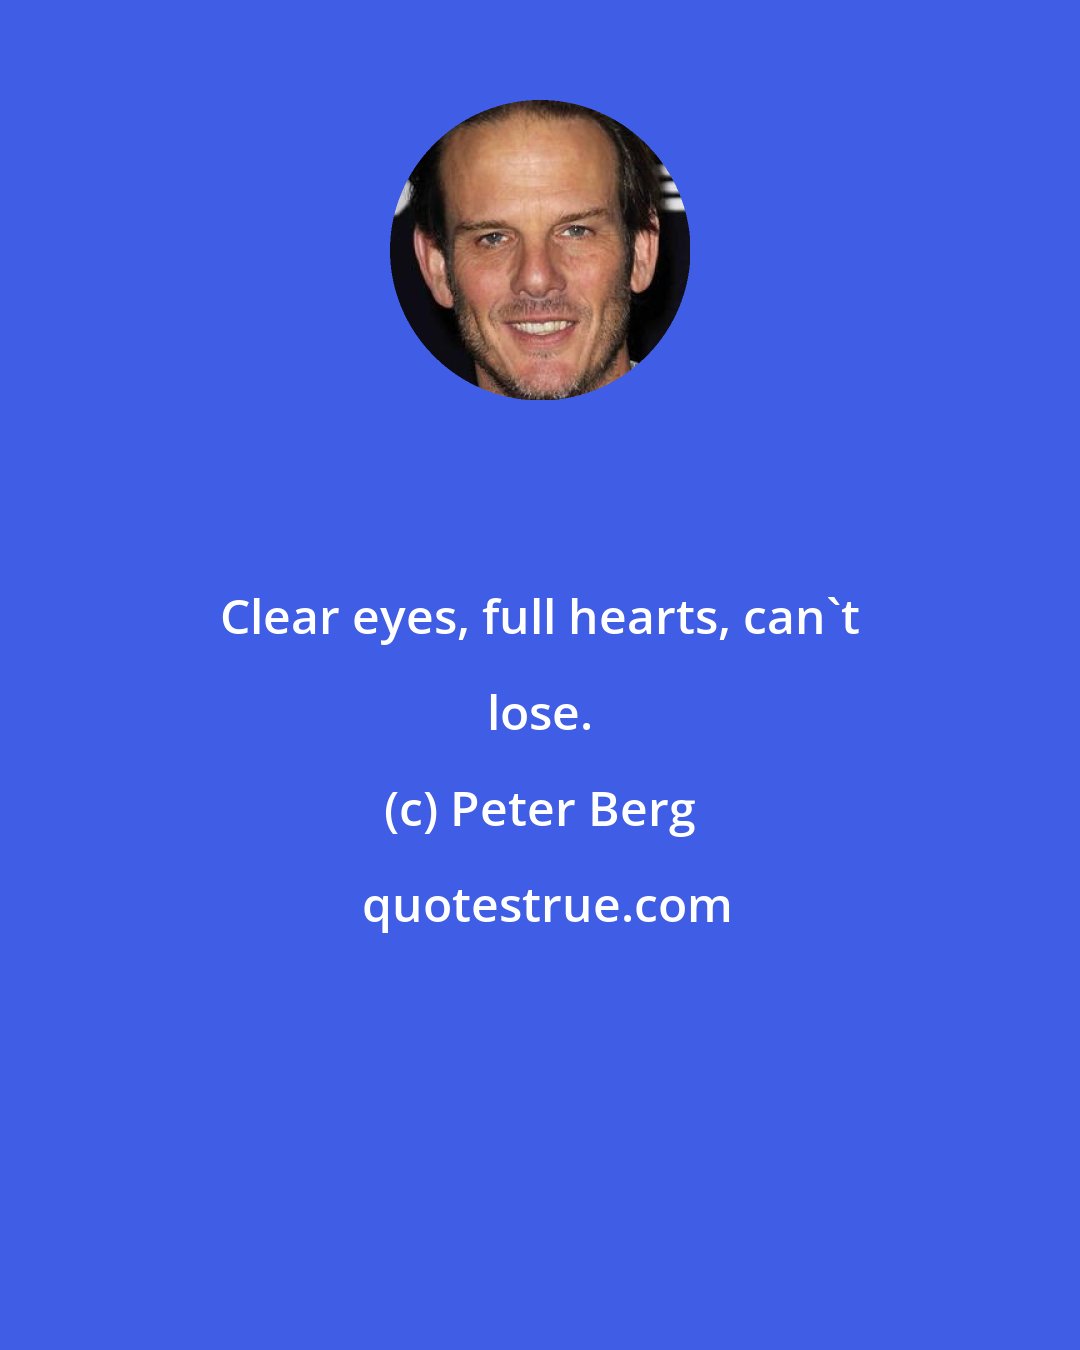 Peter Berg: Clear eyes, full hearts, can't lose.